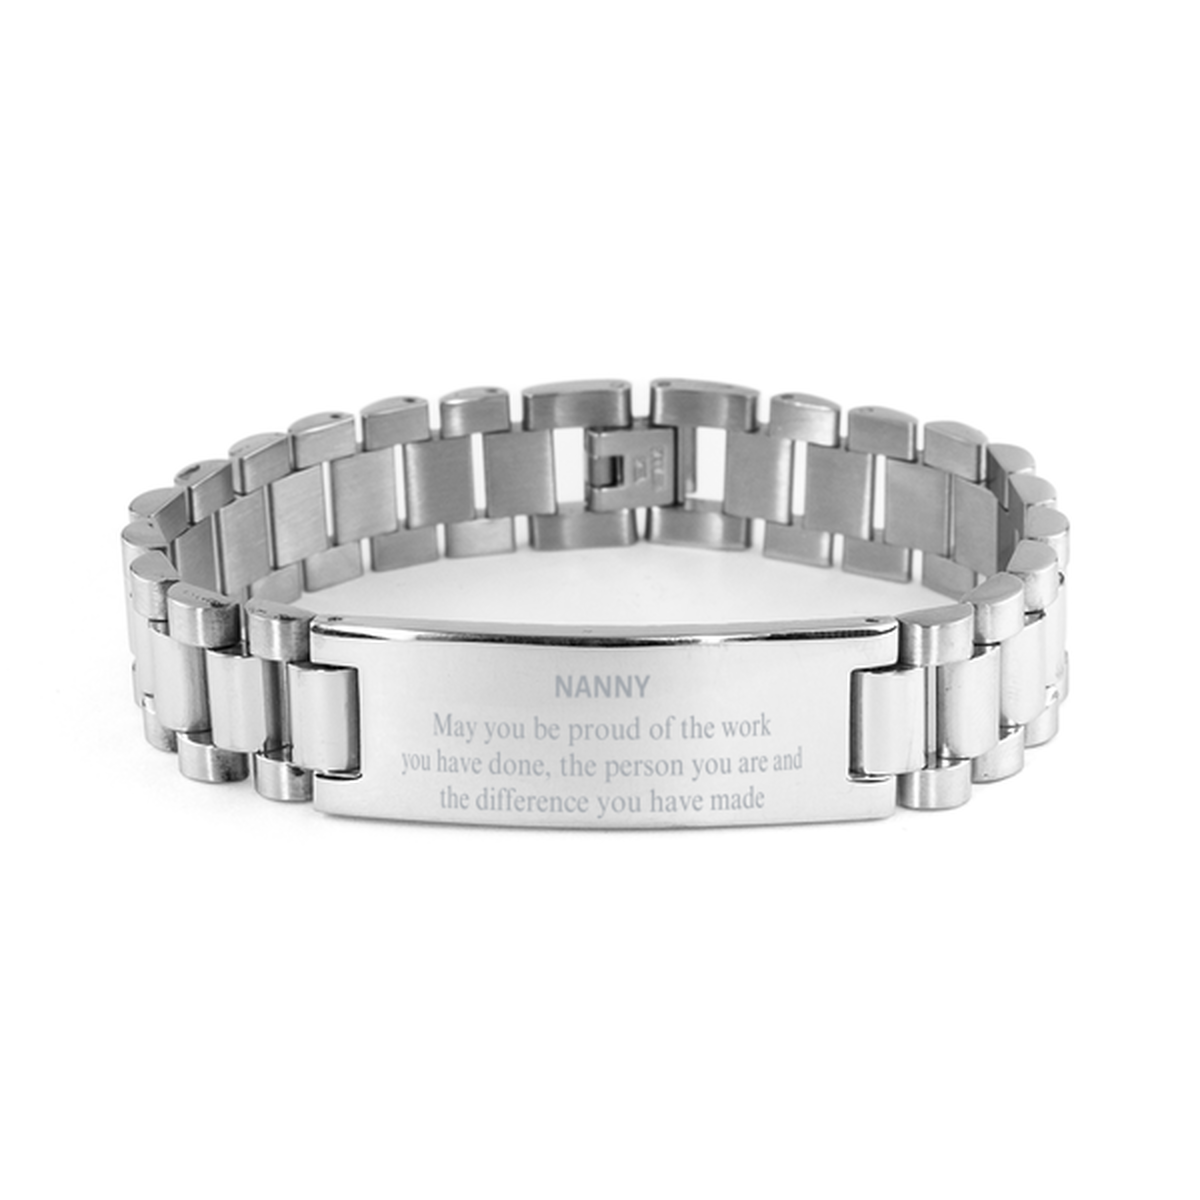 Nanny May you be proud of the work you have done, Retirement Nanny Ladder Stainless Steel Bracelet for Colleague Appreciation Gifts Amazing for Nanny